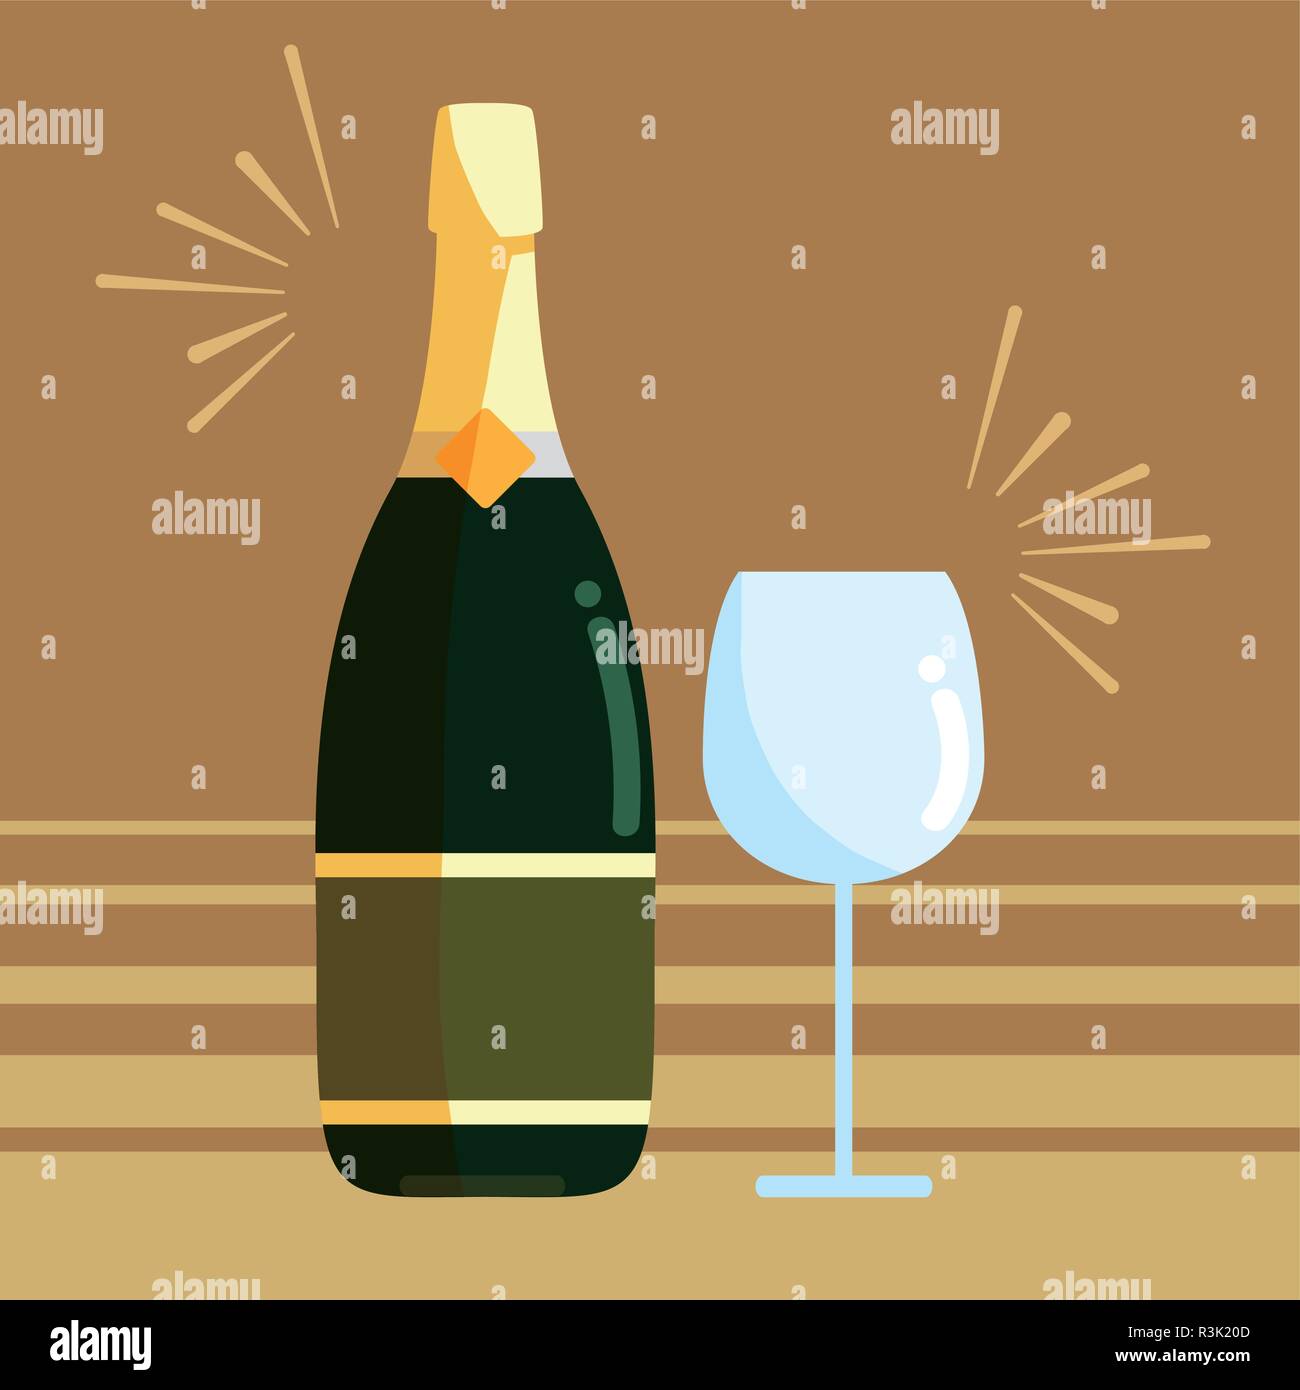 Champagne bottle and glass icon over brown background, vector illustration Stock Vector